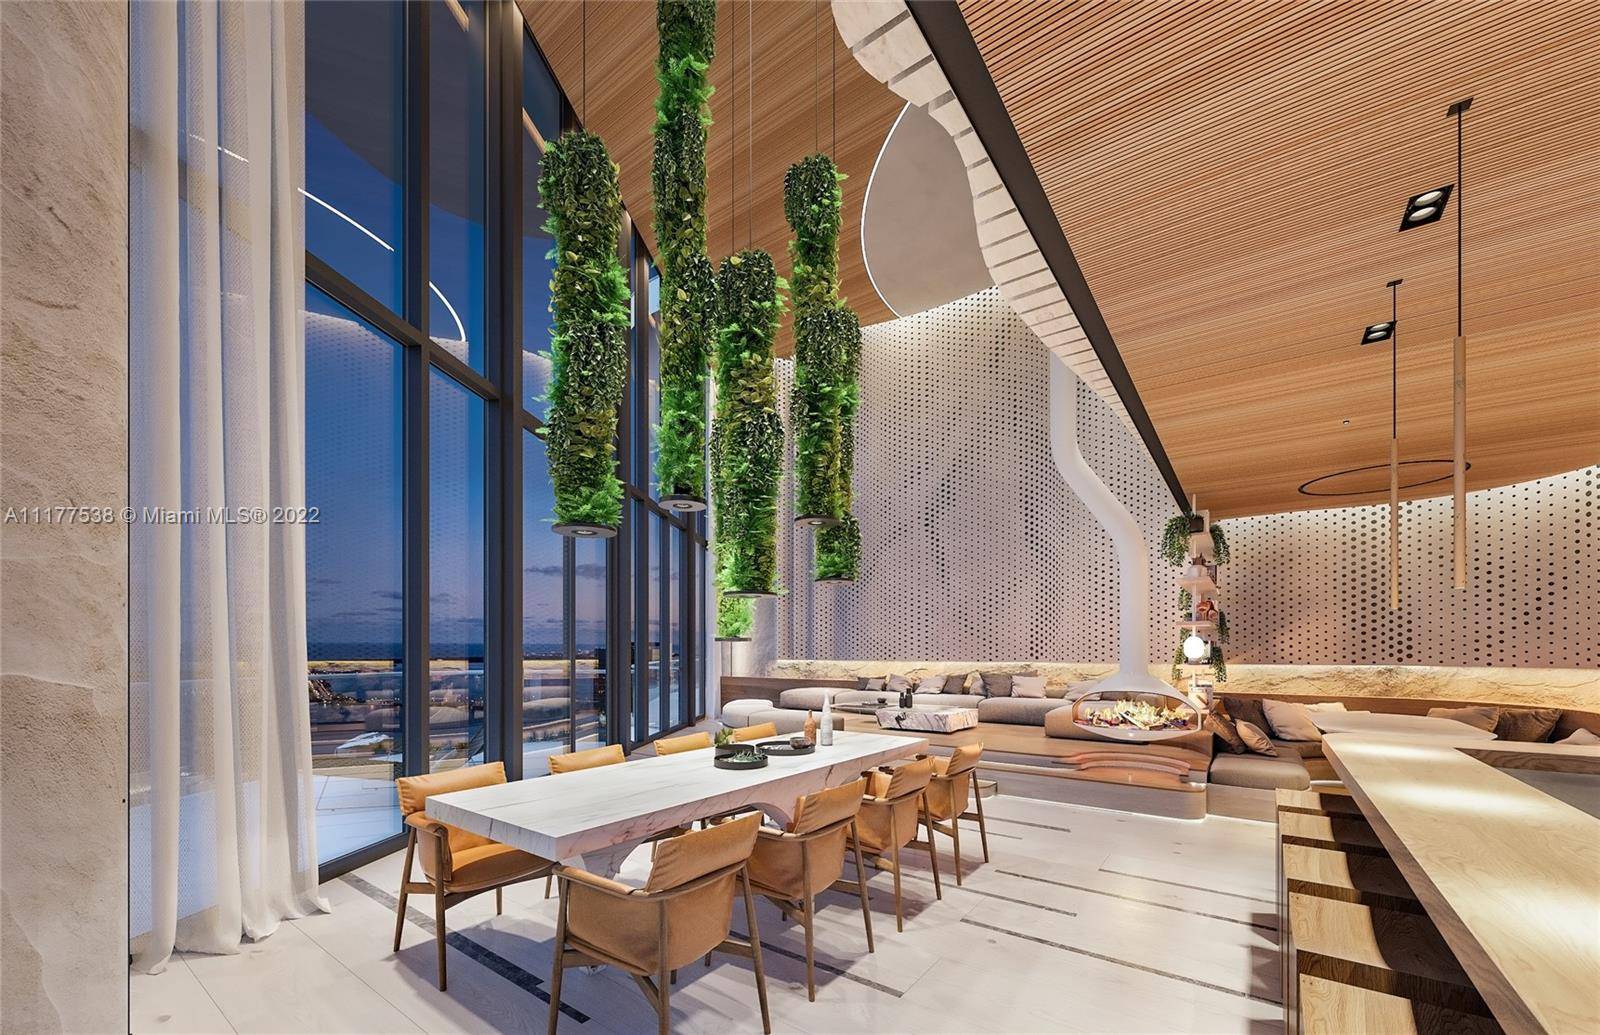 A sky penthouse unlike anything you ve ever imagined.